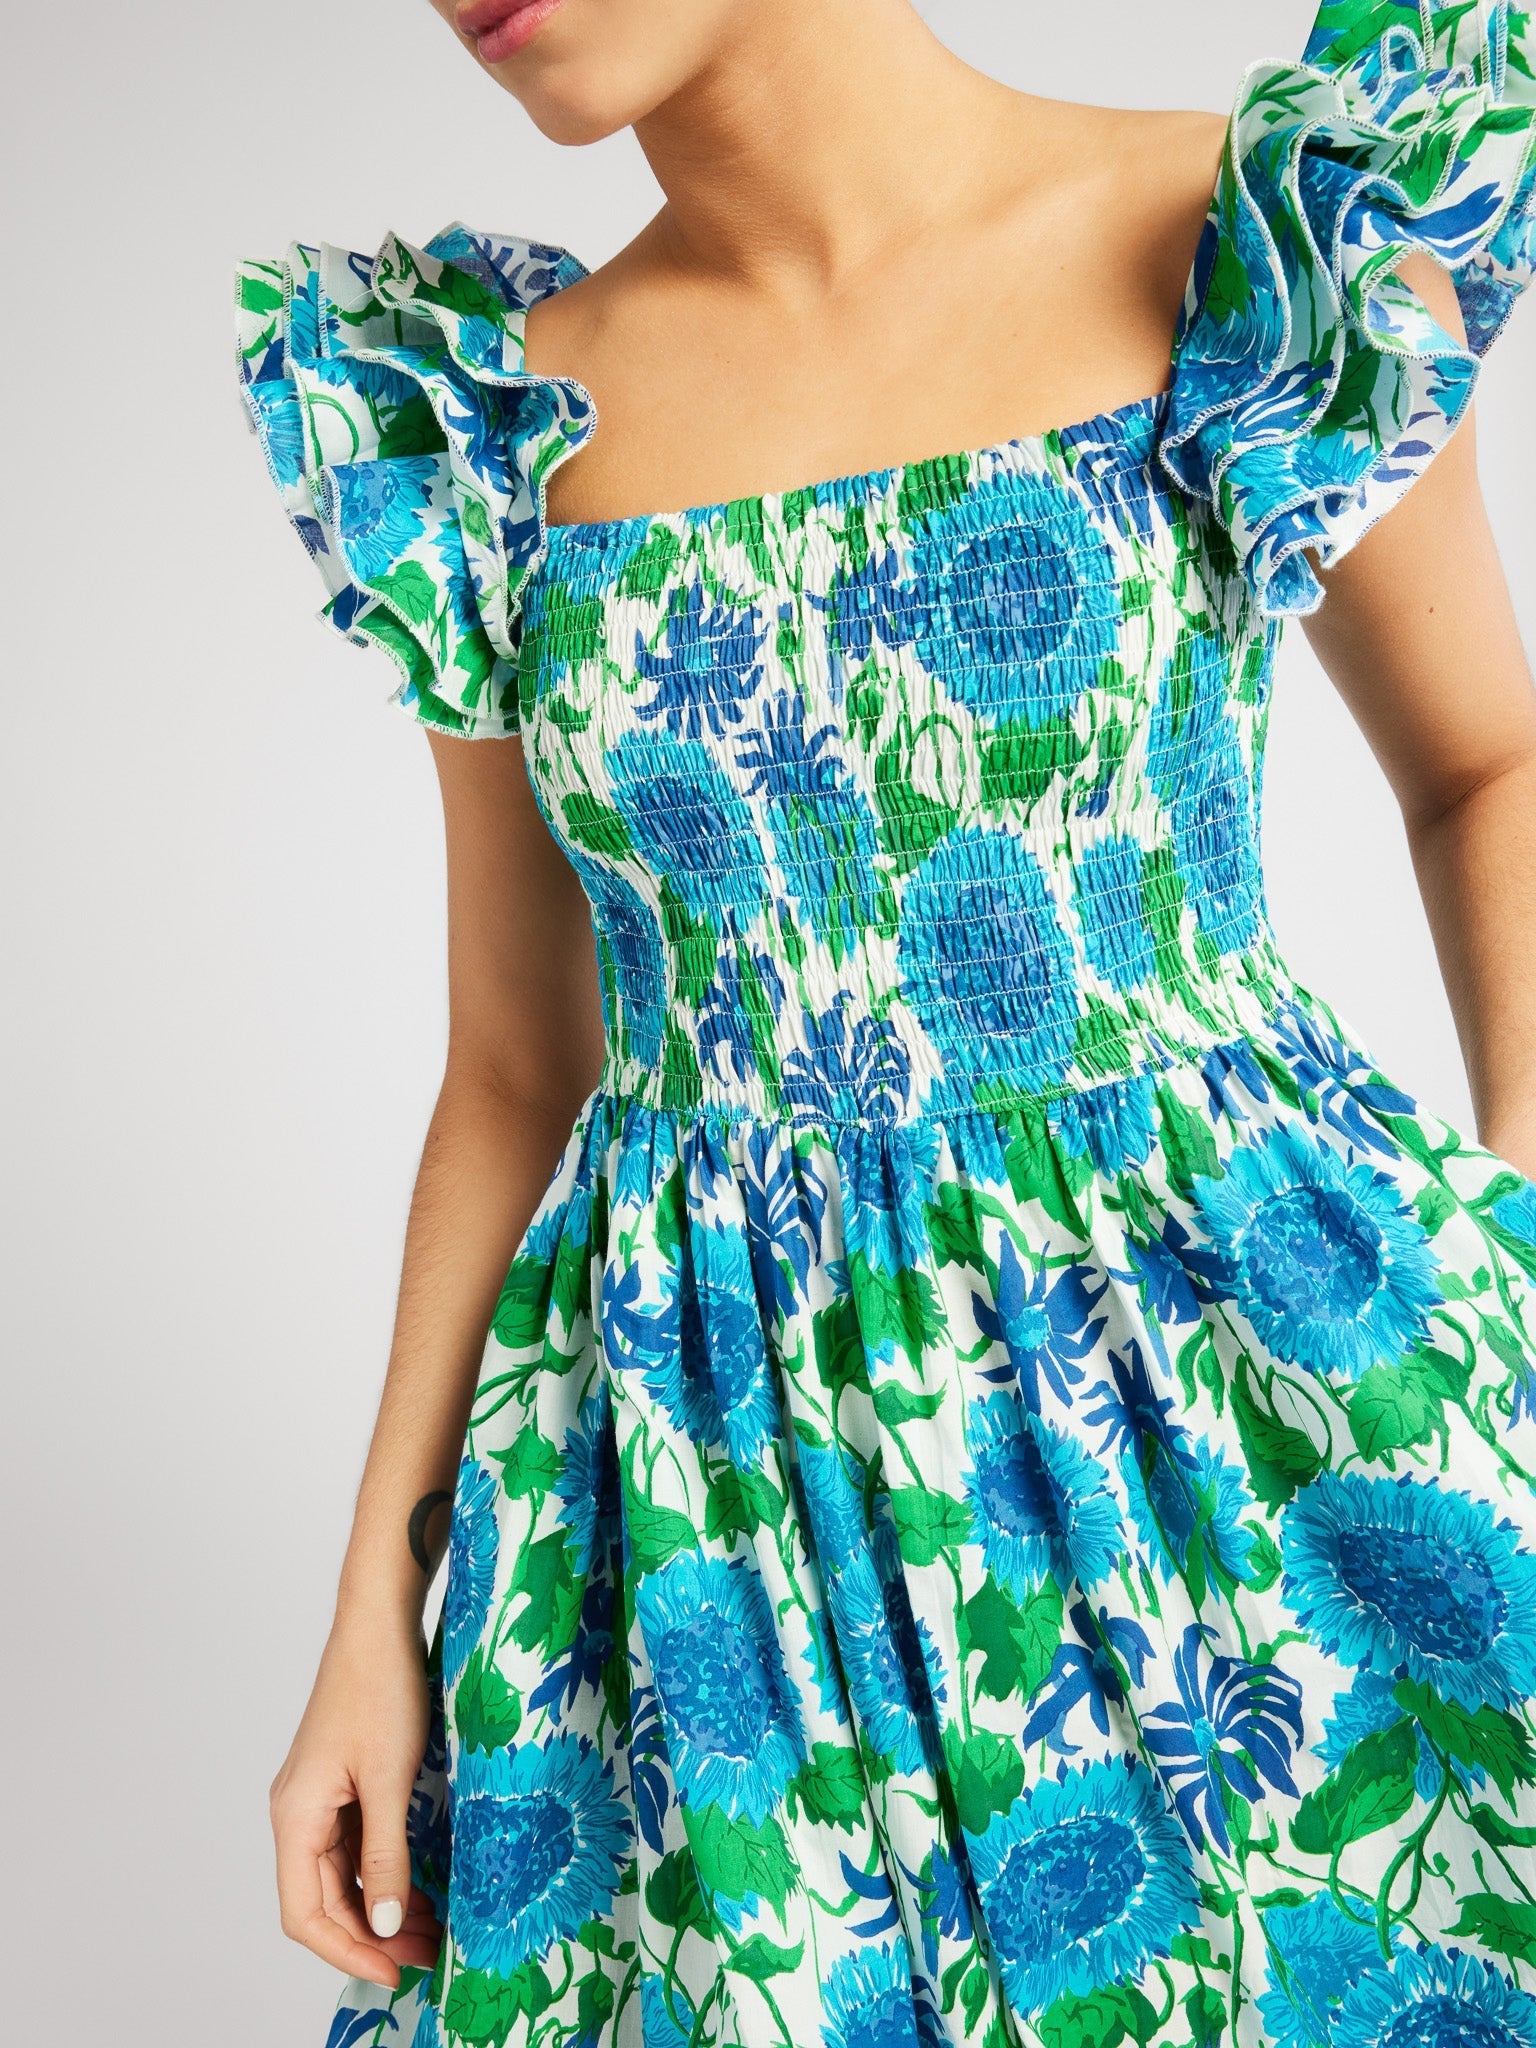 MILLE Clothing Olympia Dress in Cornflower